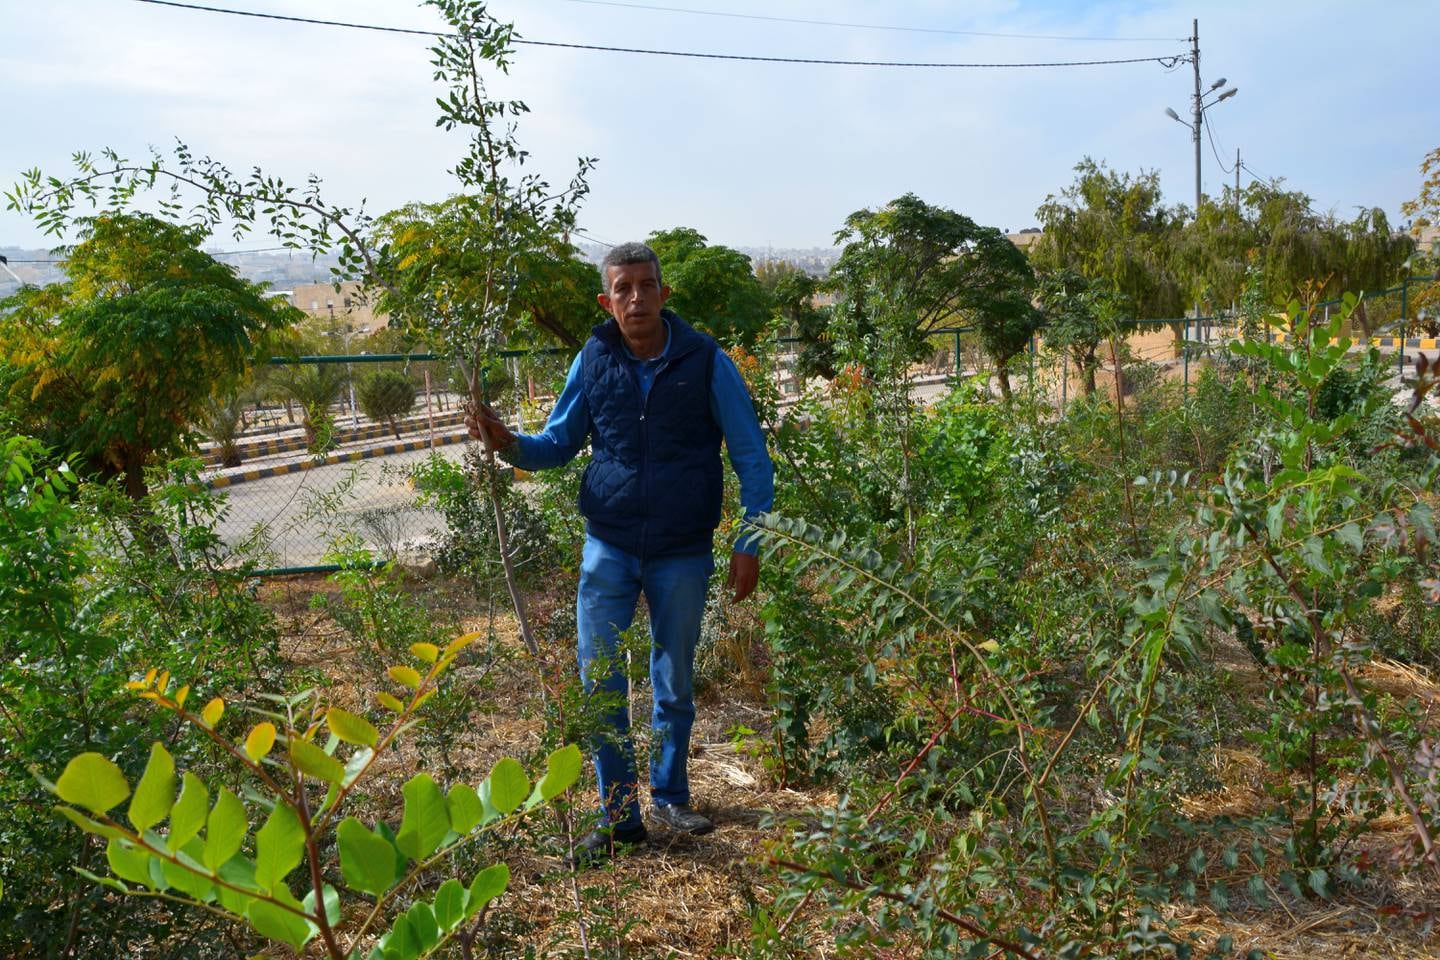 Omar Sharif holds a pistachio tree branch in the forest in Marka, East Amman